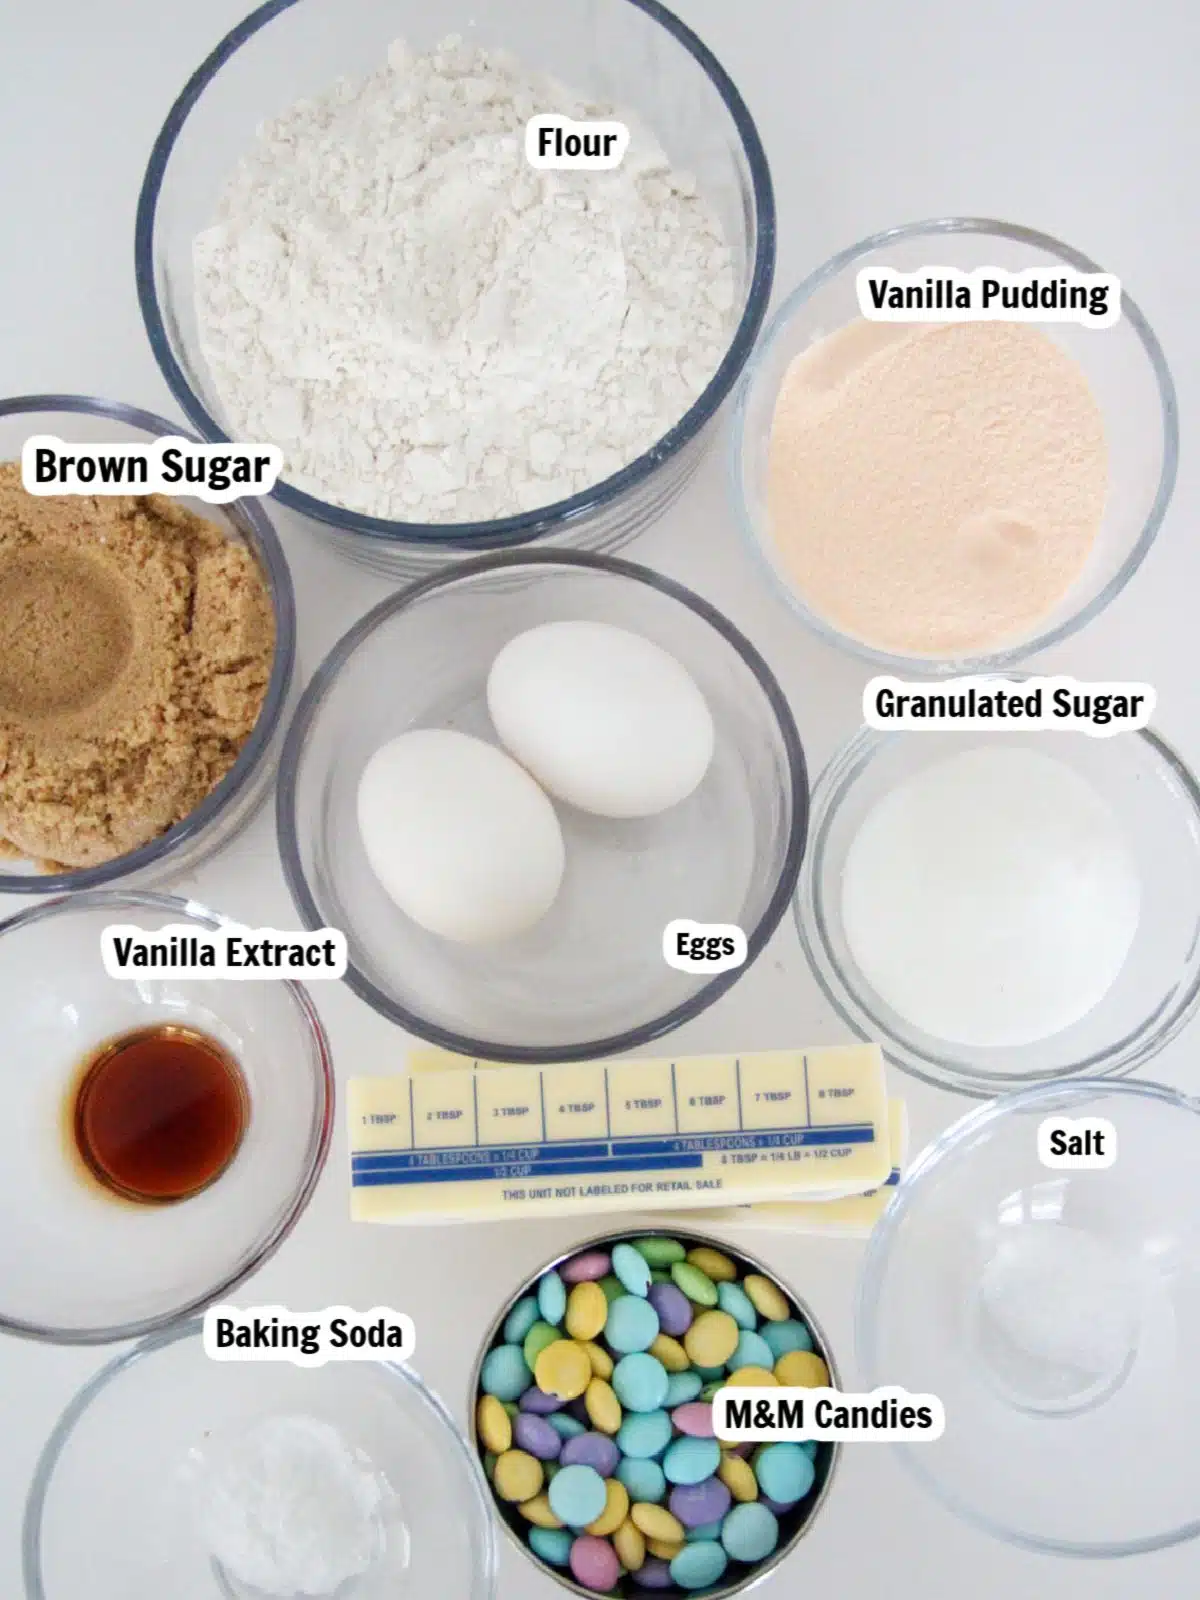 Ingredients for Easter cookies made with pastel colored M&M candies.